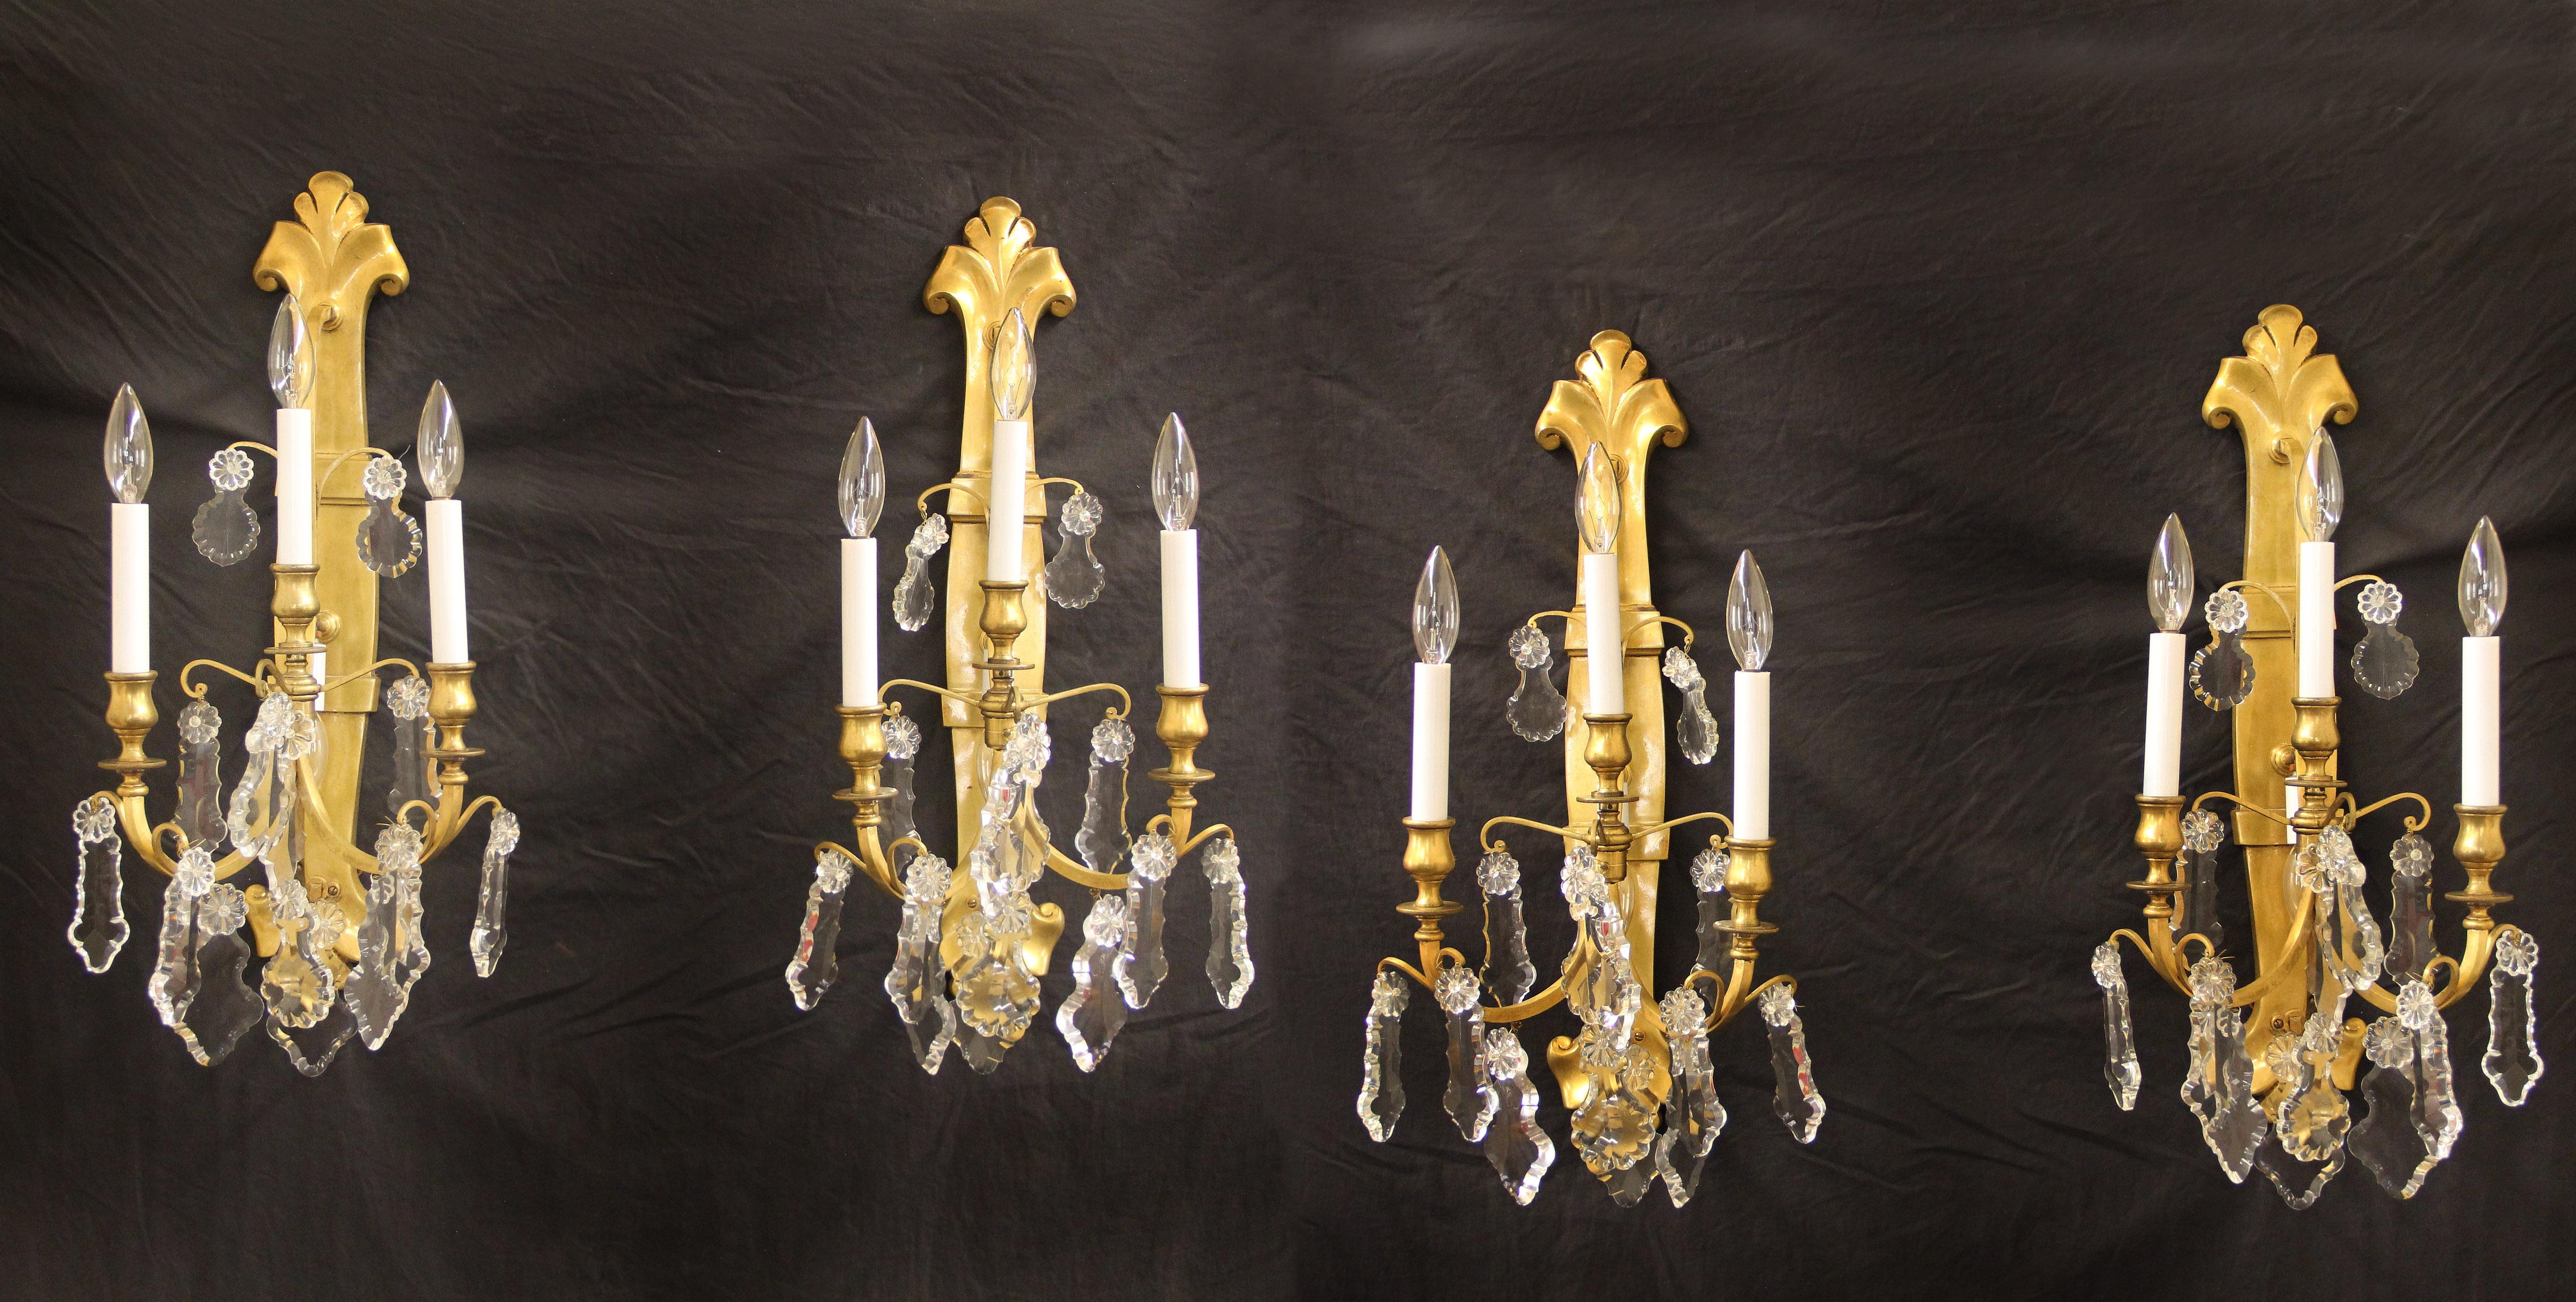 A Set of Four Late 19th / Early 20th Century Gilt Bronze and Crystal Four Light Sconces

Multi-faceted and shaped crystals, three exterior lights and one downward facing interior light.